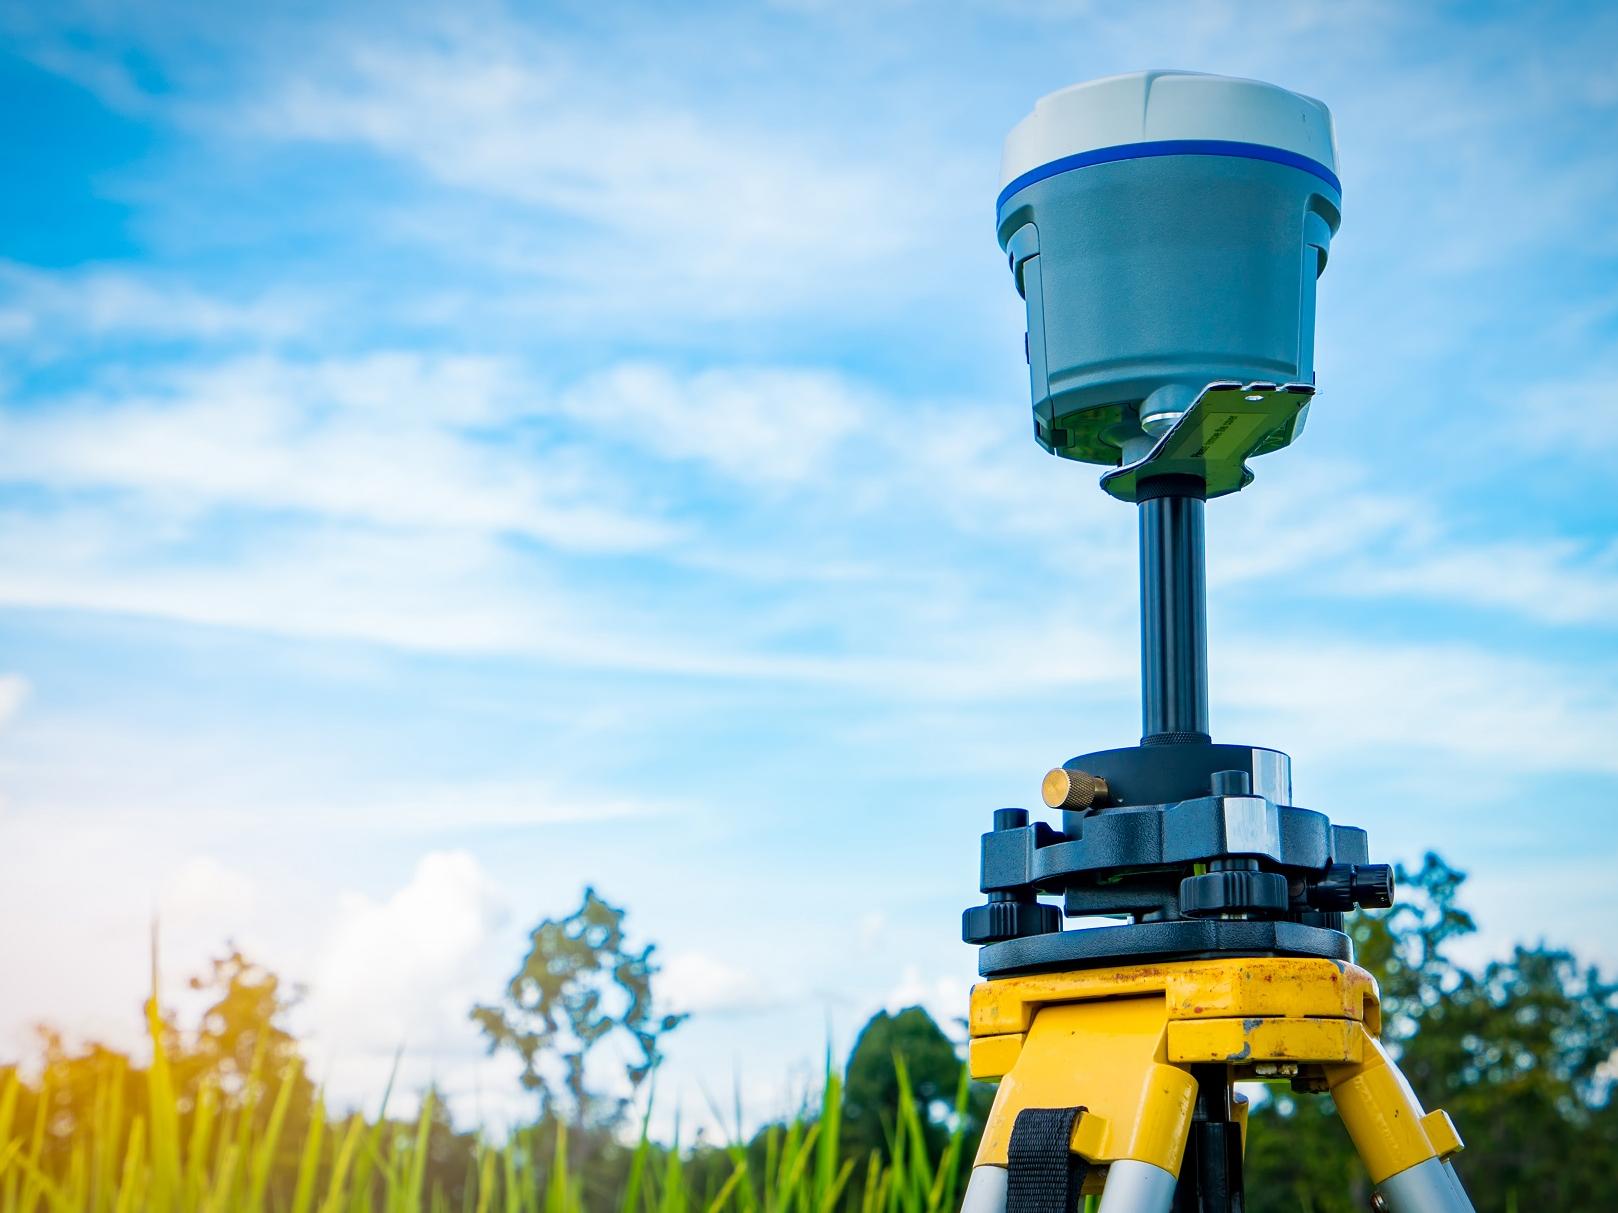 GPS surveying instrument on blue sky and rice field background © Artinun, Adobe stock